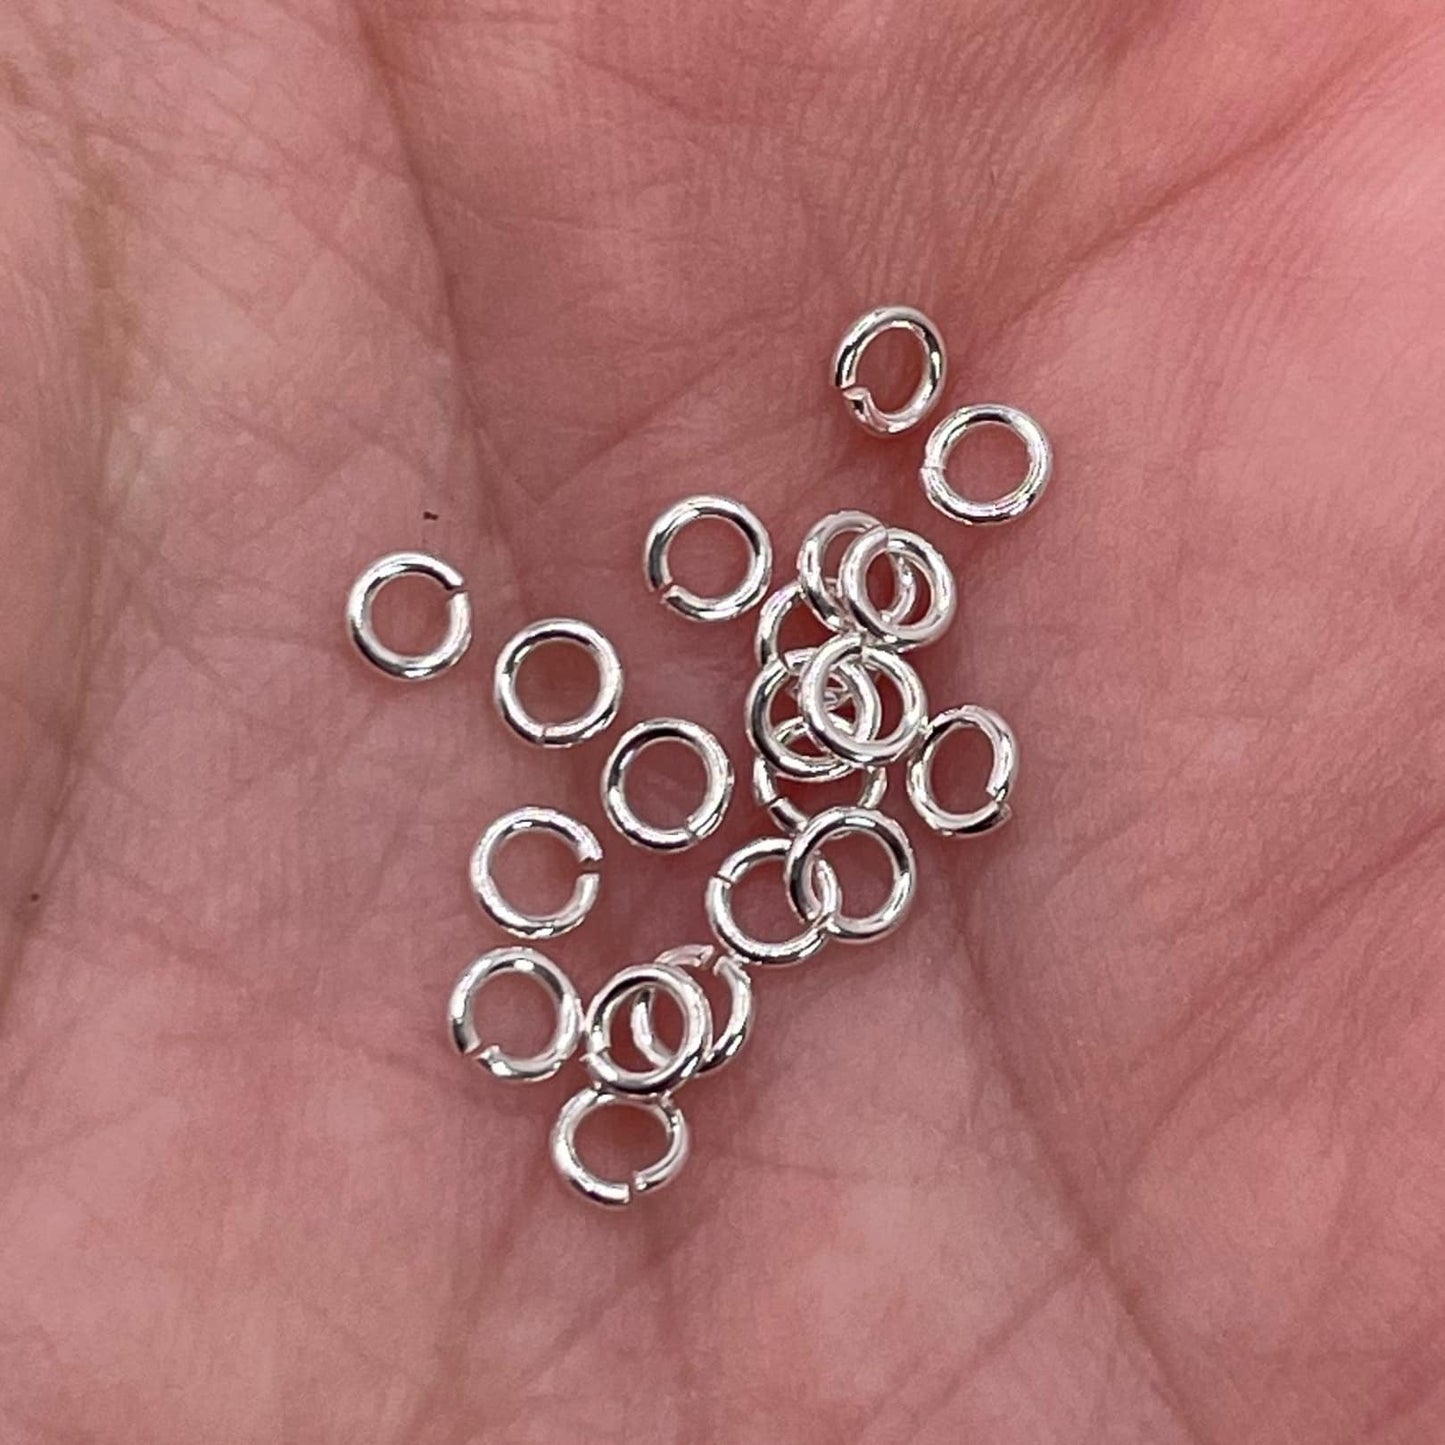 Actual photo of 925 Sterling Silver Jump Rings.